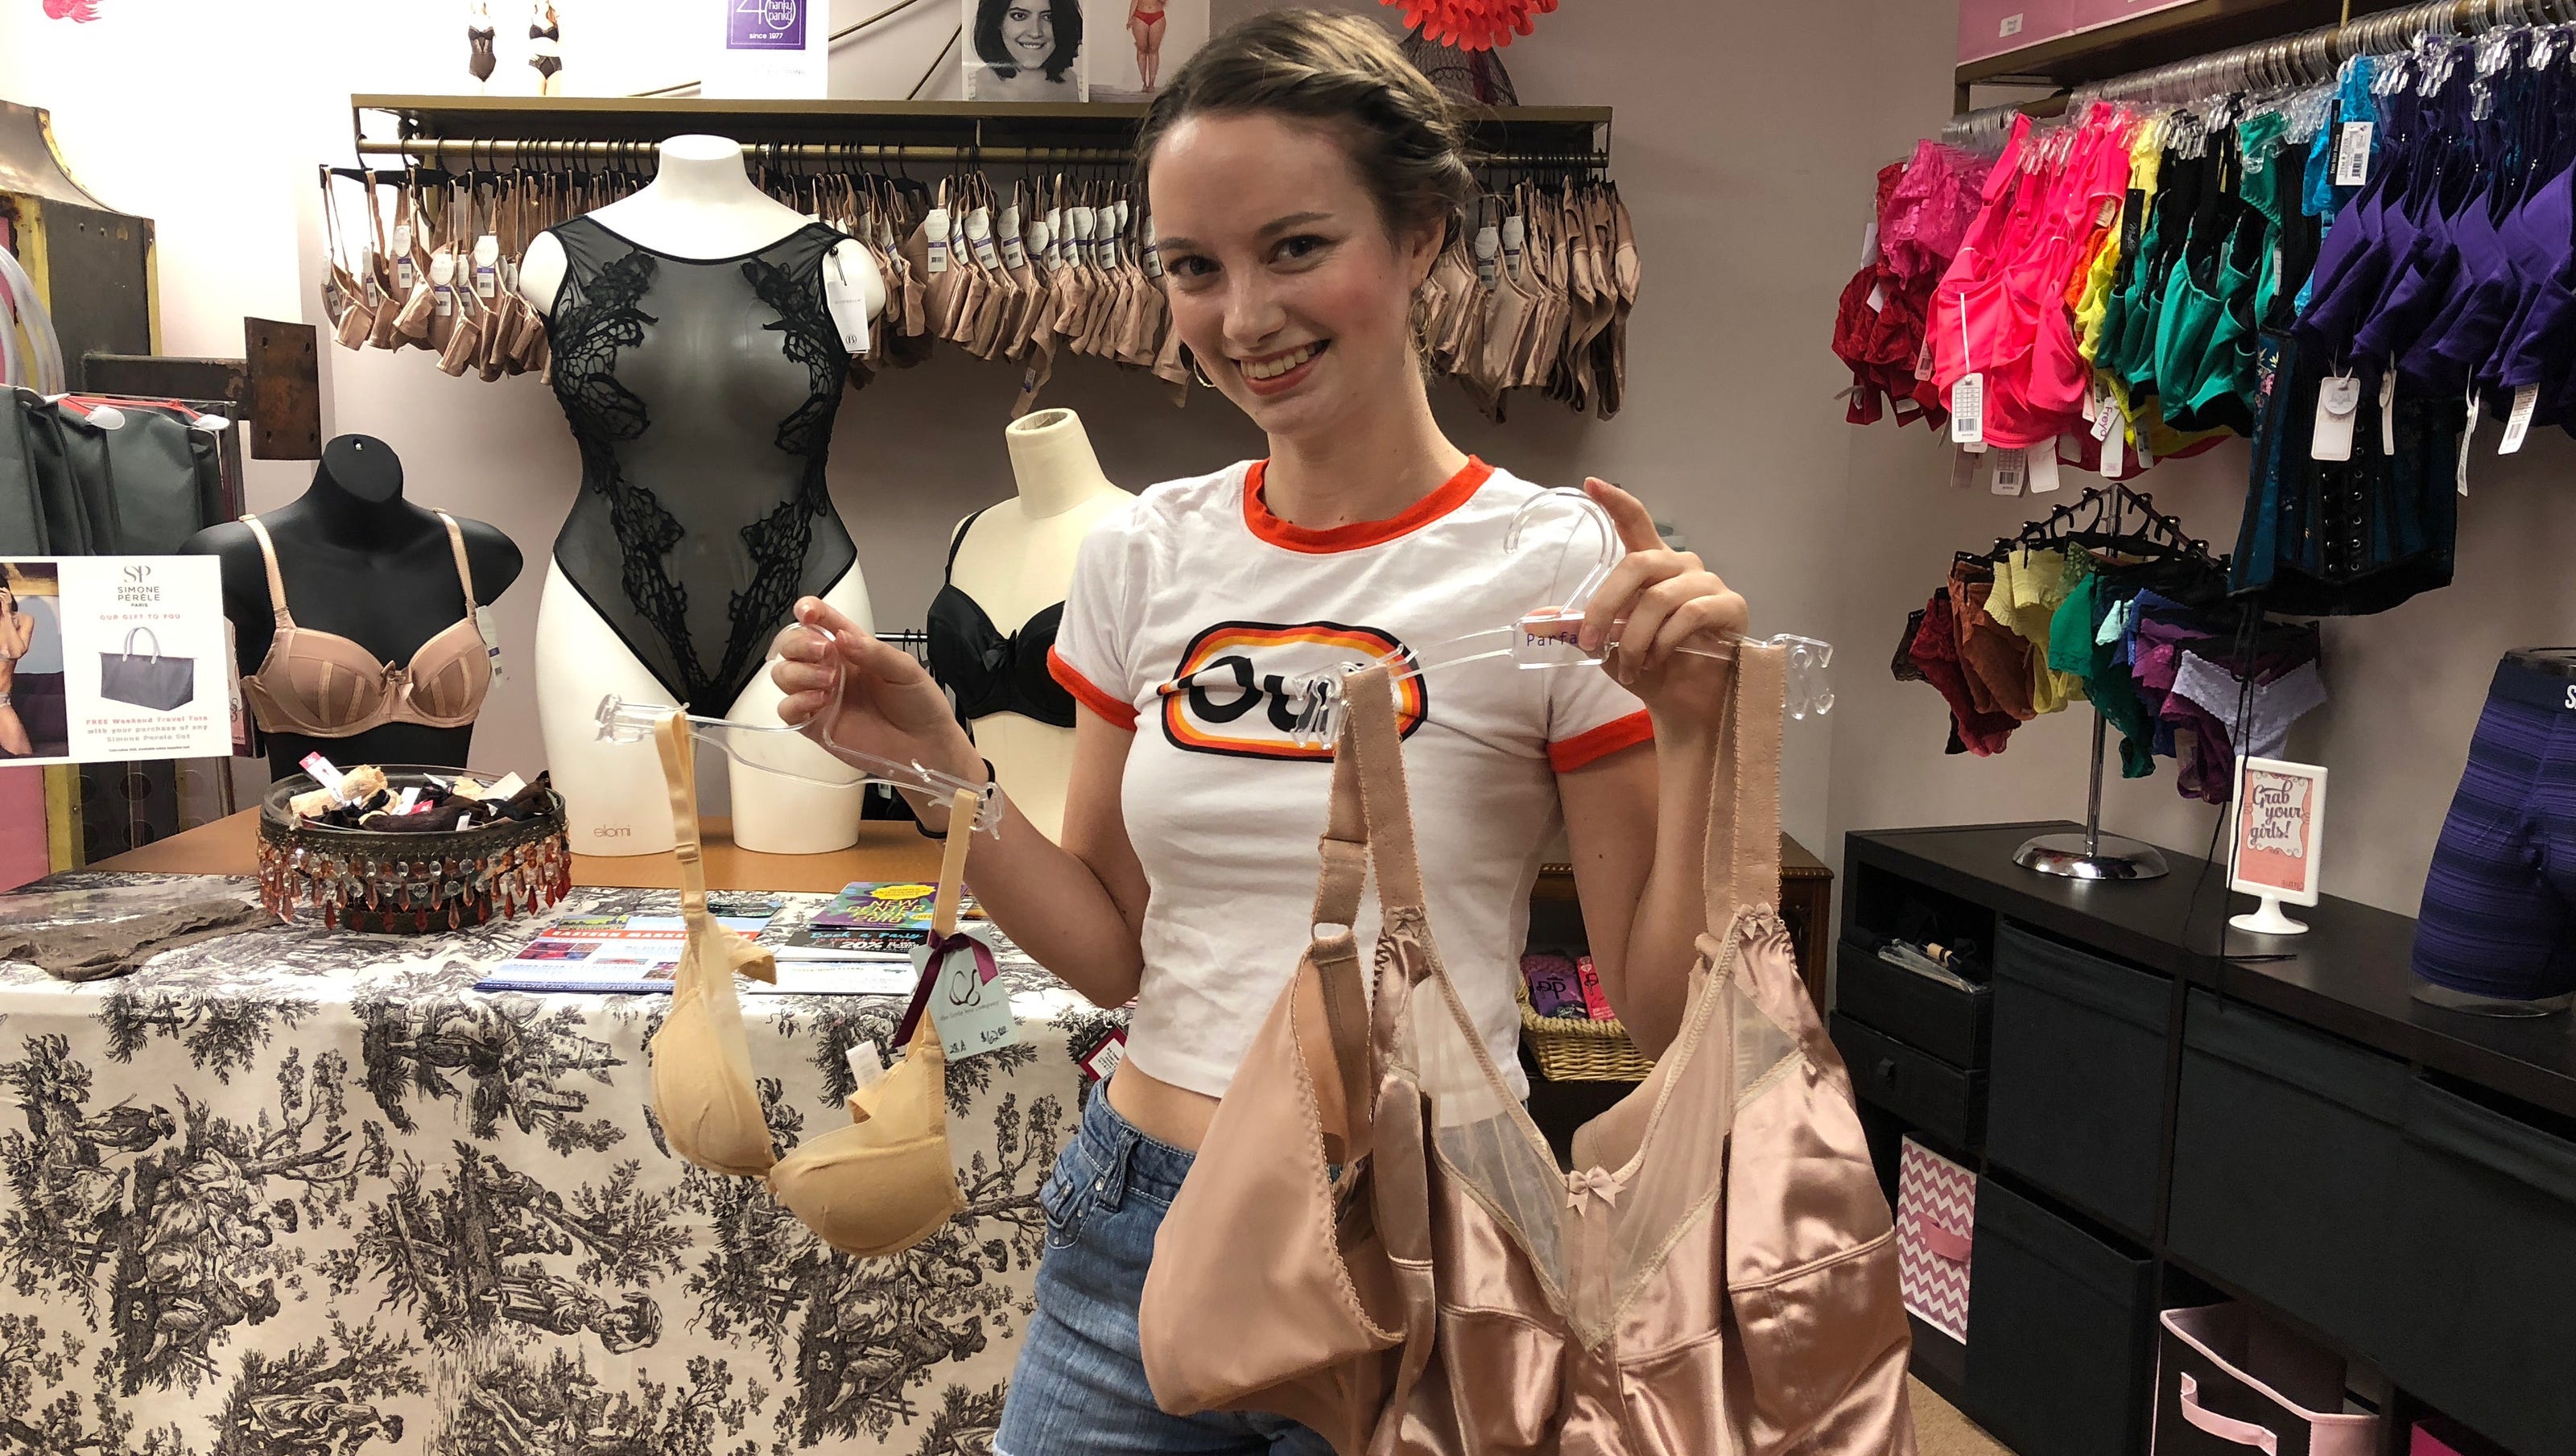 Sundance Clothing - Sandwich, Ma - We have a wide selection of Coobie Bras  available in both Chatham and Sandwich as well as our website! Have you  ever tried a Coobie before?